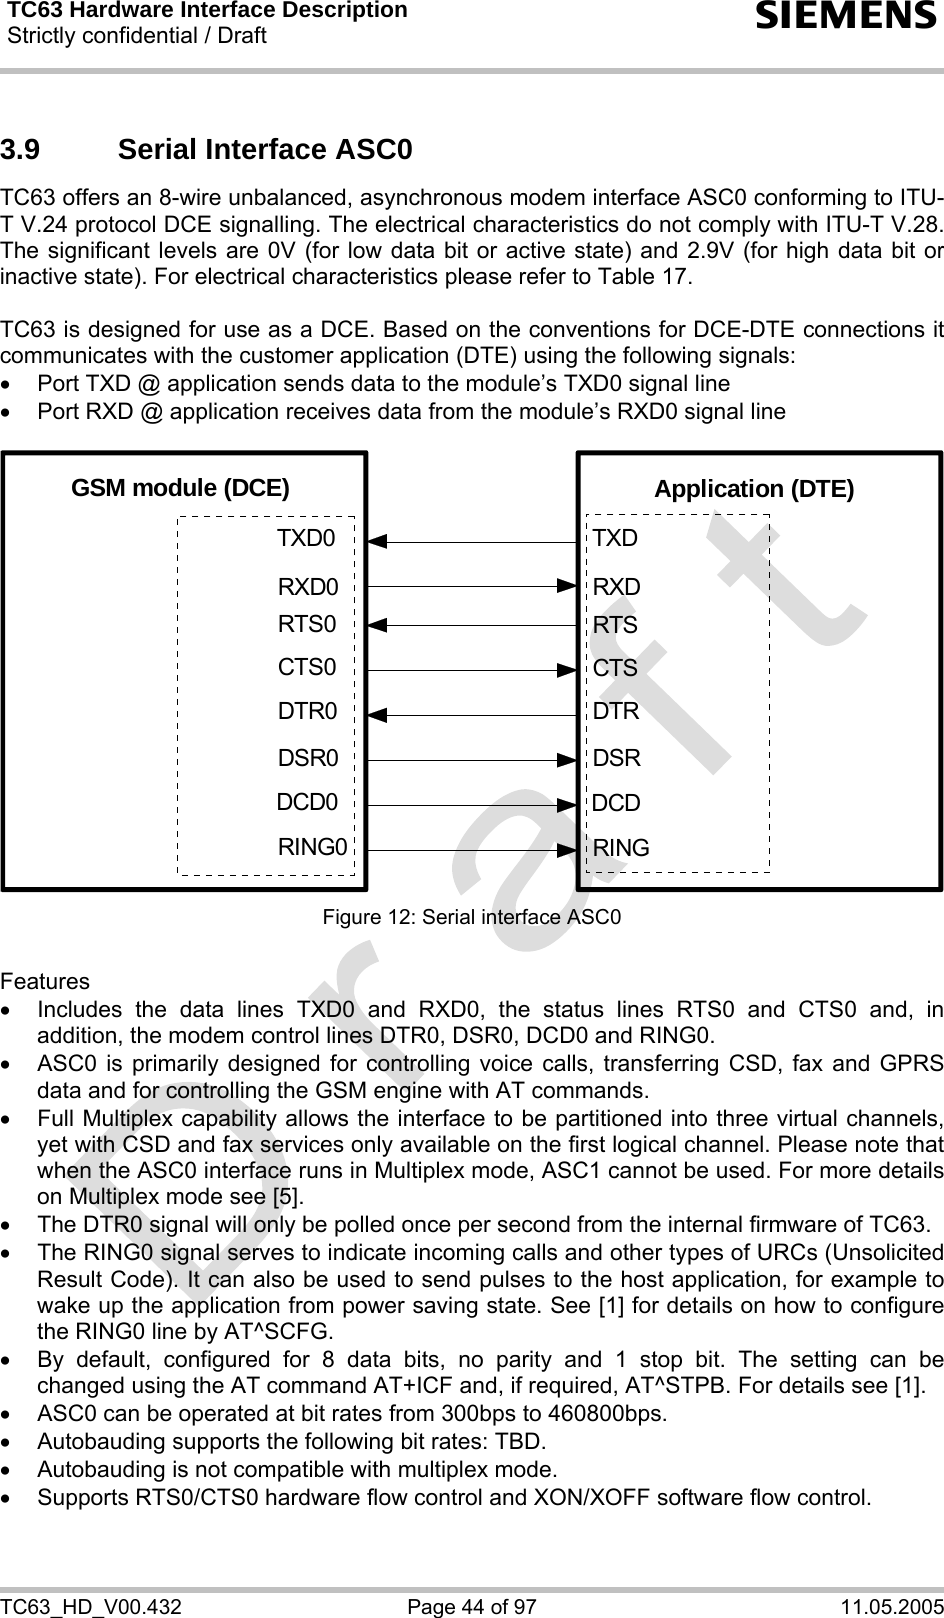 TC63 Hardware Interface Description Strictly confidential / Draft  s TC63_HD_V00.432  Page 44 of 97  11.05.2005 3.9  Serial Interface ASC0 TC63 offers an 8-wire unbalanced, asynchronous modem interface ASC0 conforming to ITU-T V.24 protocol DCE signalling. The electrical characteristics do not comply with ITU-T V.28. The significant levels are 0V (for low data bit or active state) and 2.9V (for high data bit or inactive state). For electrical characteristics please refer to Table 17.  TC63 is designed for use as a DCE. Based on the conventions for DCE-DTE connections it communicates with the customer application (DTE) using the following signals: •  Port TXD @ application sends data to the module’s TXD0 signal line •  Port RXD @ application receives data from the module’s RXD0 signal line  GSM module (DCE) Application (DTE)TXDRXDRTSCTSRINGDCDDSRDTRTXD0RXD0RTS0CTS0RING0DCD0DSR0DTR0 Figure 12: Serial interface ASC0  Features •  Includes the data lines TXD0 and RXD0, the status lines RTS0 and CTS0 and, in addition, the modem control lines DTR0, DSR0, DCD0 and RING0.  •  ASC0 is primarily designed for controlling voice calls, transferring CSD, fax and GPRS data and for controlling the GSM engine with AT commands.  •  Full Multiplex capability allows the interface to be partitioned into three virtual channels, yet with CSD and fax services only available on the first logical channel. Please note that when the ASC0 interface runs in Multiplex mode, ASC1 cannot be used. For more details on Multiplex mode see [5]. •  The DTR0 signal will only be polled once per second from the internal firmware of TC63.  •  The RING0 signal serves to indicate incoming calls and other types of URCs (Unsolicited Result Code). It can also be used to send pulses to the host application, for example to wake up the application from power saving state. See [1] for details on how to configure the RING0 line by AT^SCFG. •  By default, configured for 8 data bits, no parity and 1 stop bit. The setting can be changed using the AT command AT+ICF and, if required, AT^STPB. For details see [1]. •  ASC0 can be operated at bit rates from 300bps to 460800bps. •  Autobauding supports the following bit rates: TBD.  •  Autobauding is not compatible with multiplex mode. •  Supports RTS0/CTS0 hardware flow control and XON/XOFF software flow control.  